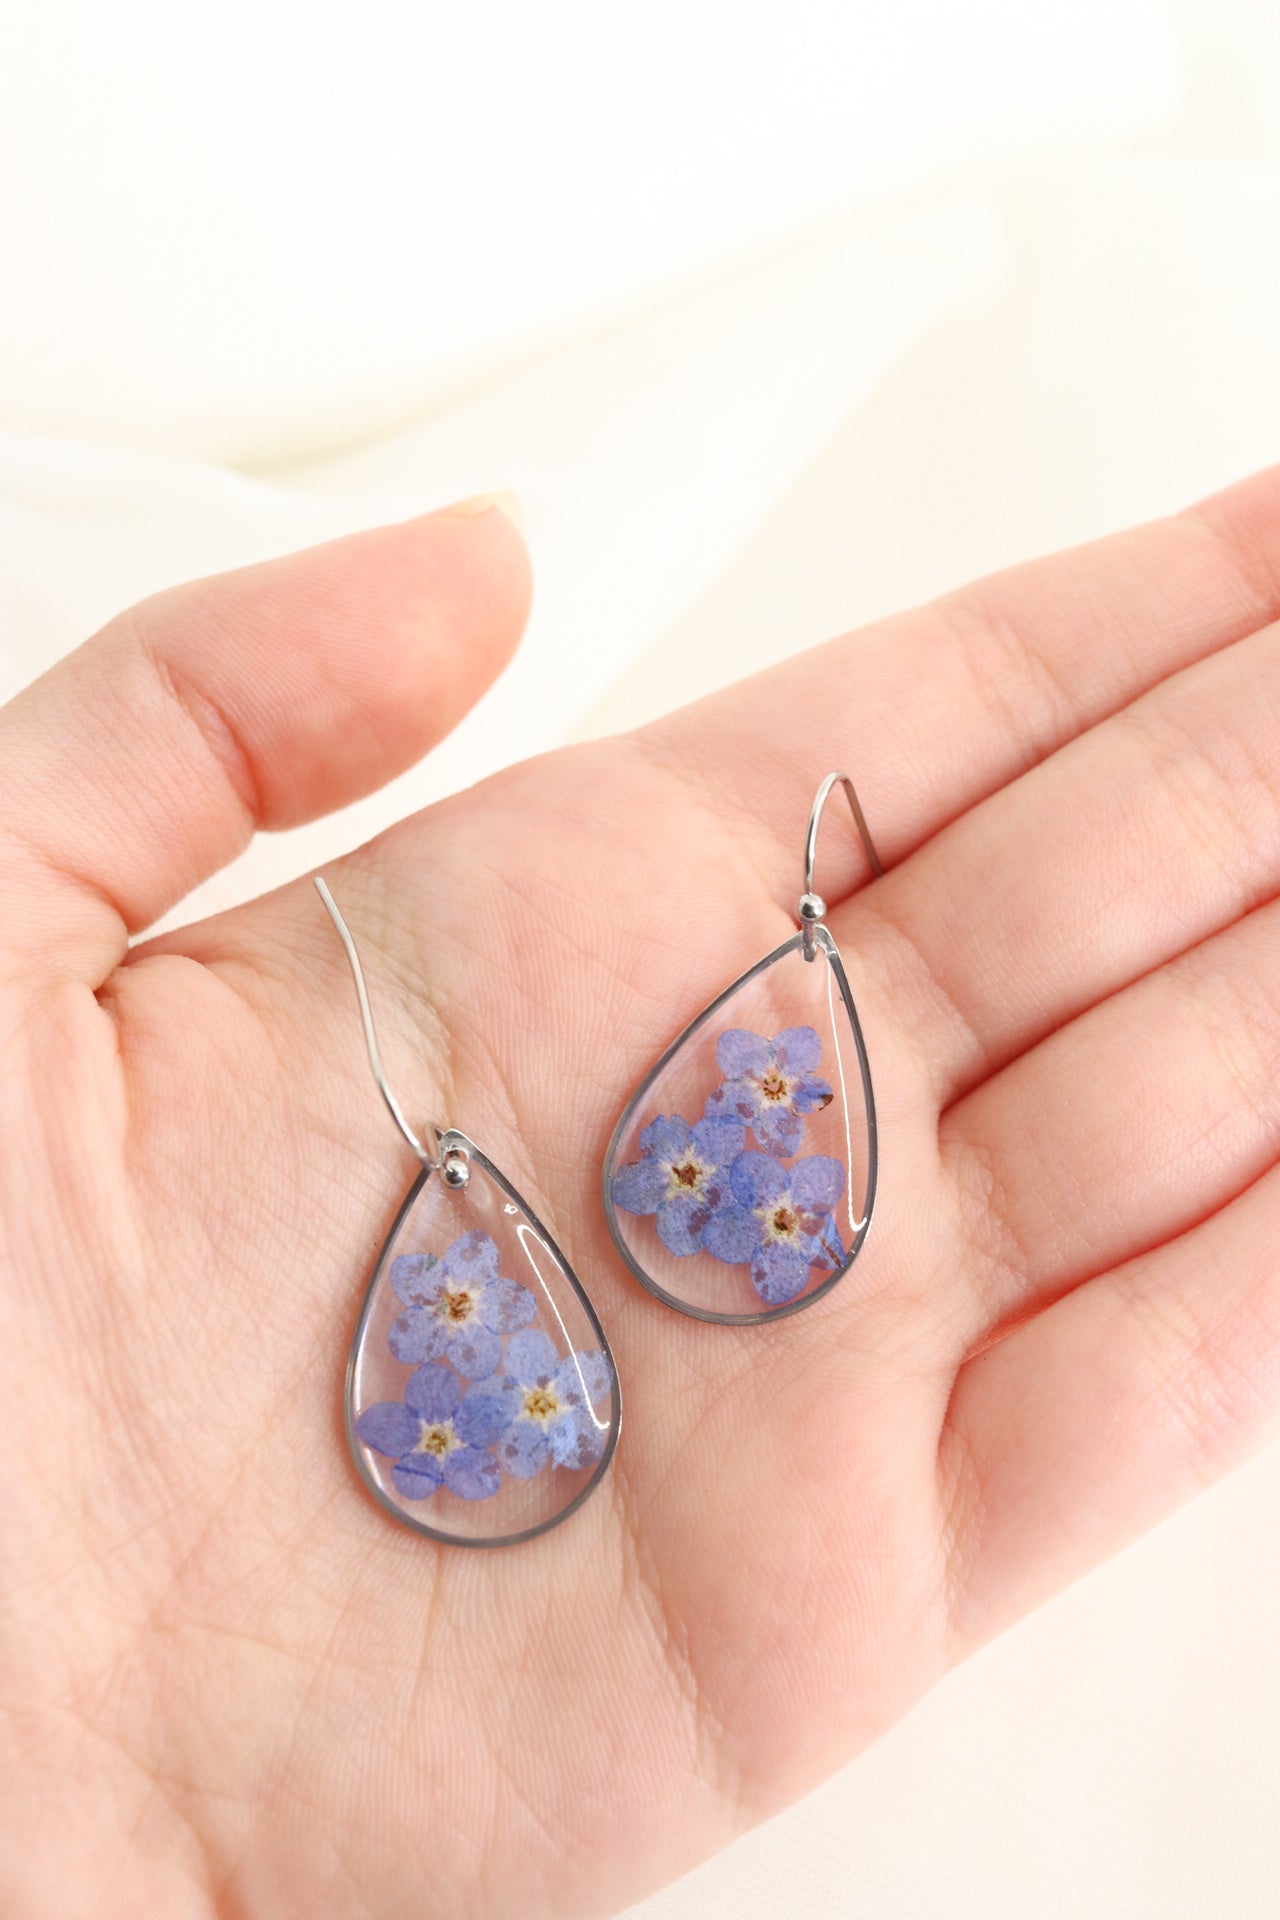 Forget Me Not Wildflower Small Teardrop Resin Earrings, Pressed Dried Natural Flowers, Botanical Nature Jewelry Gift For Her